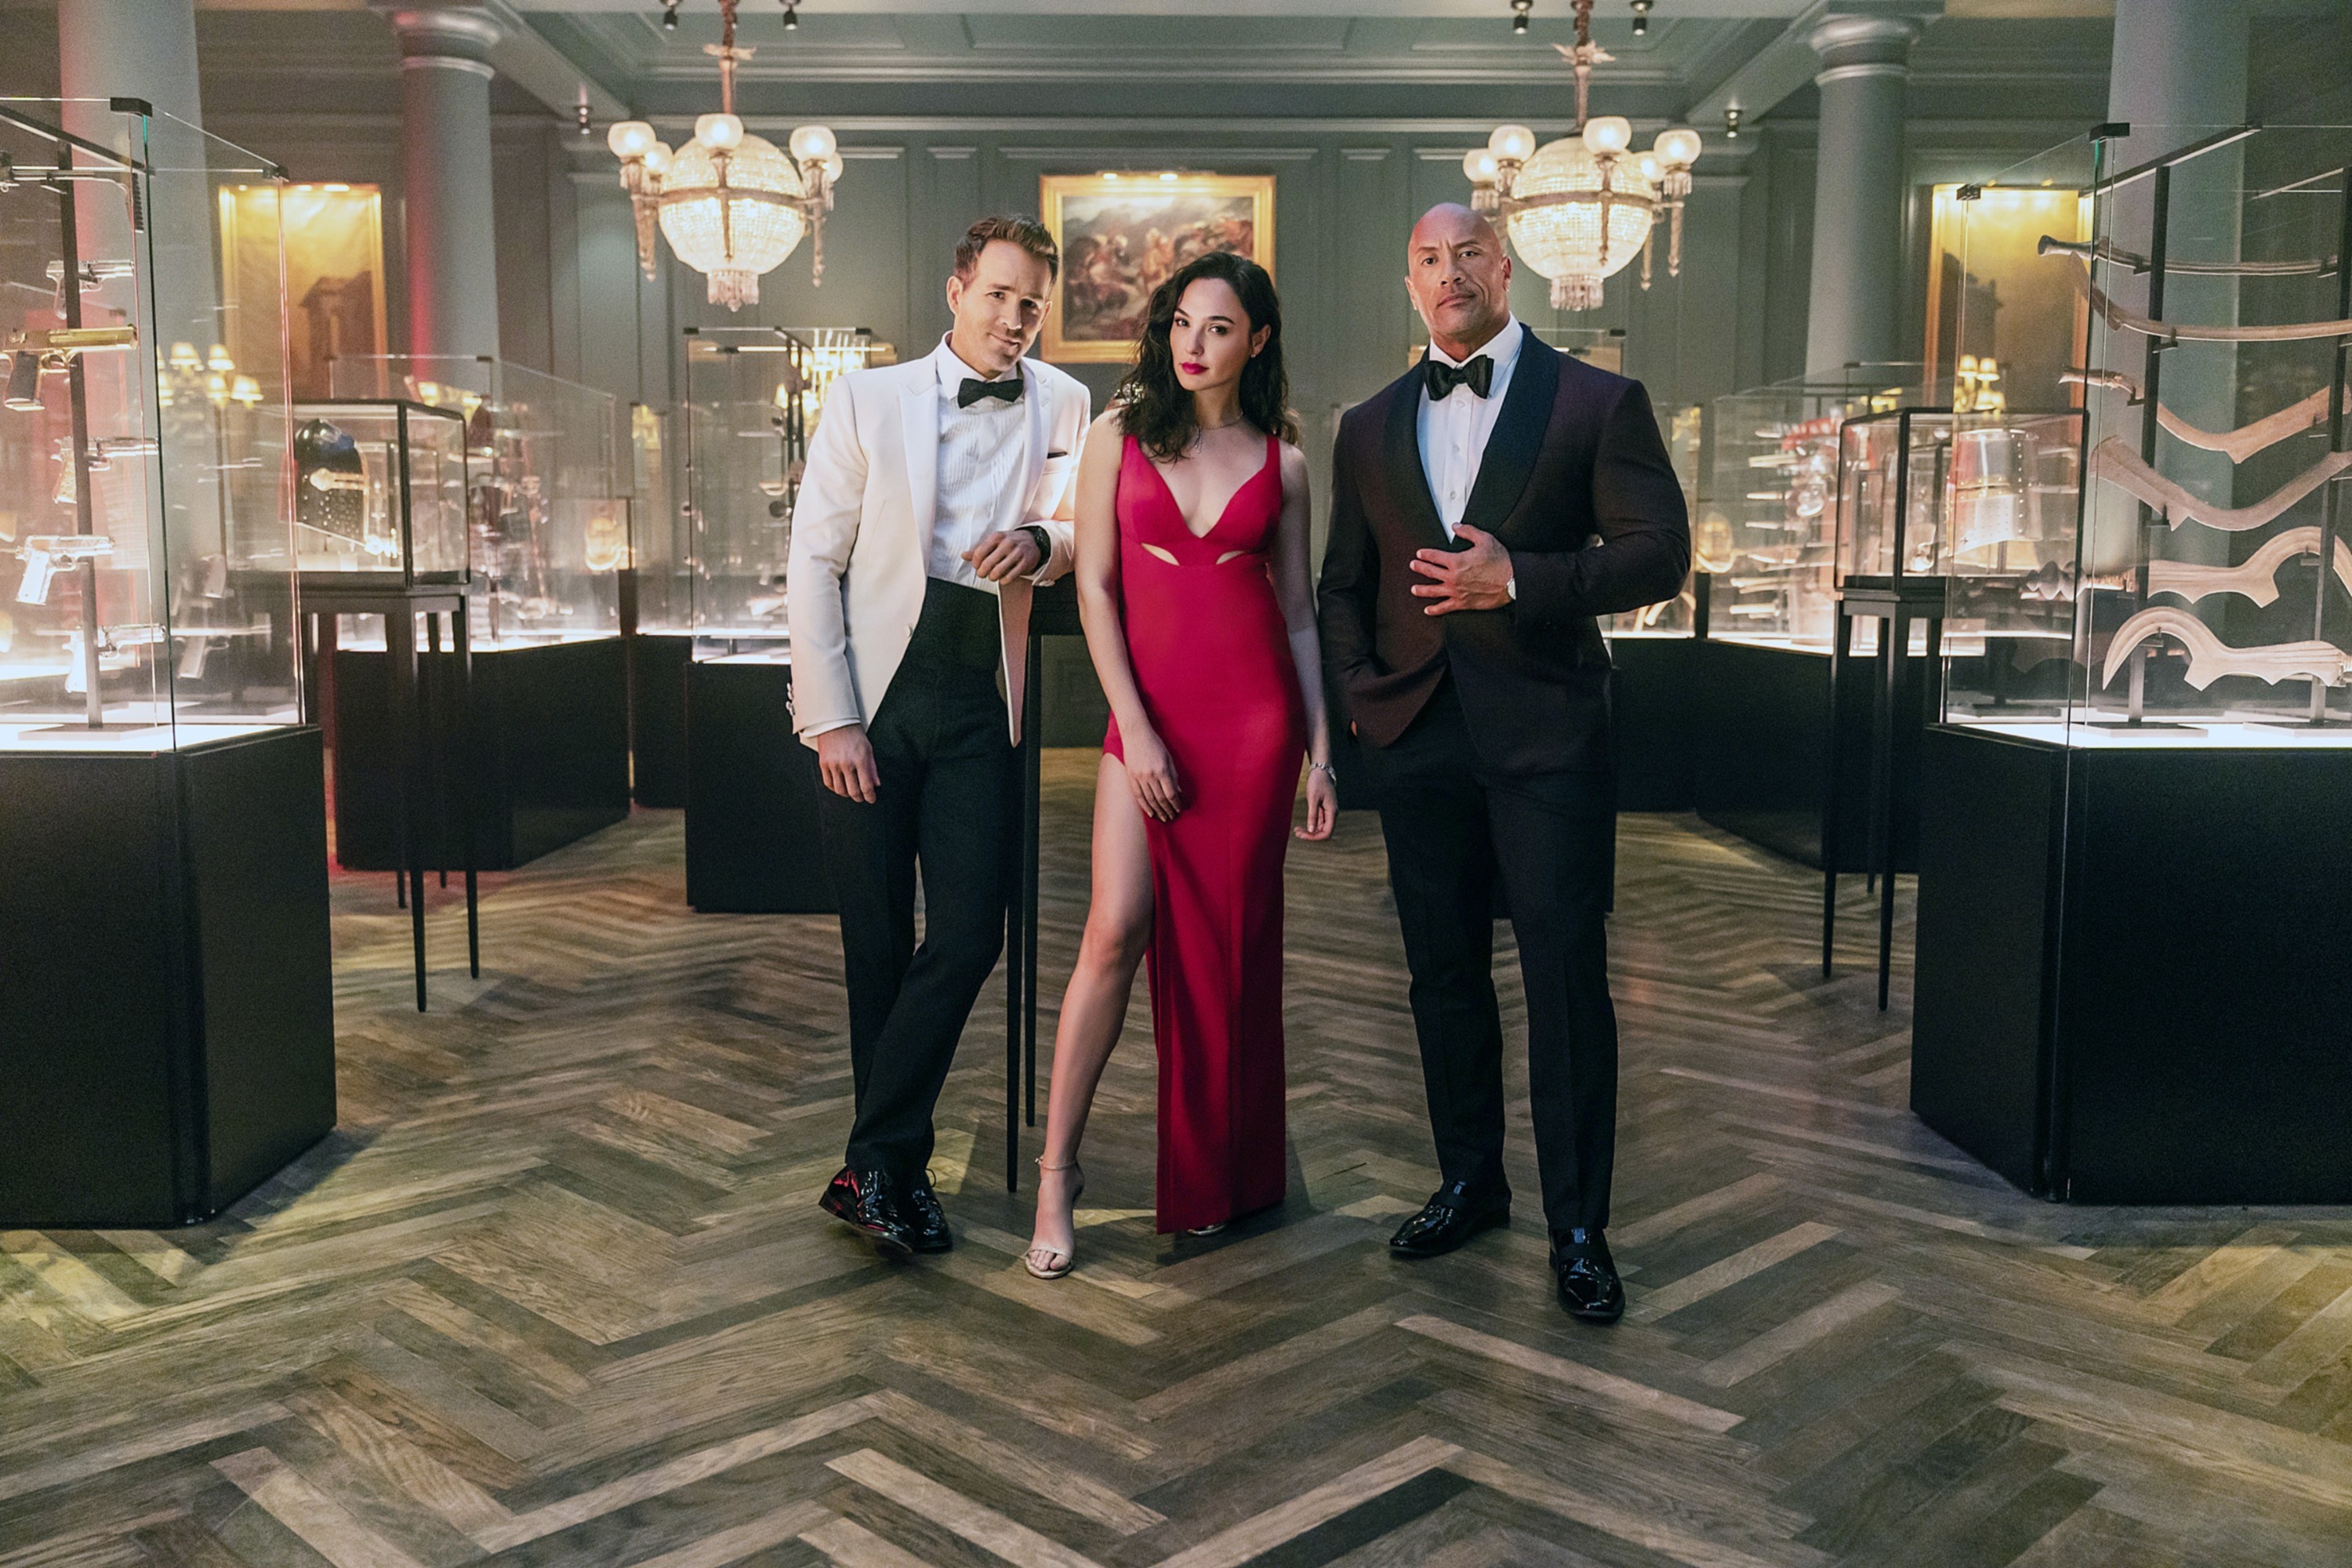 Dwayne Johnson, Gal Gadot, and Ryan Reynolds wearing evening garb as they stand in a room full of weapons in glass cases